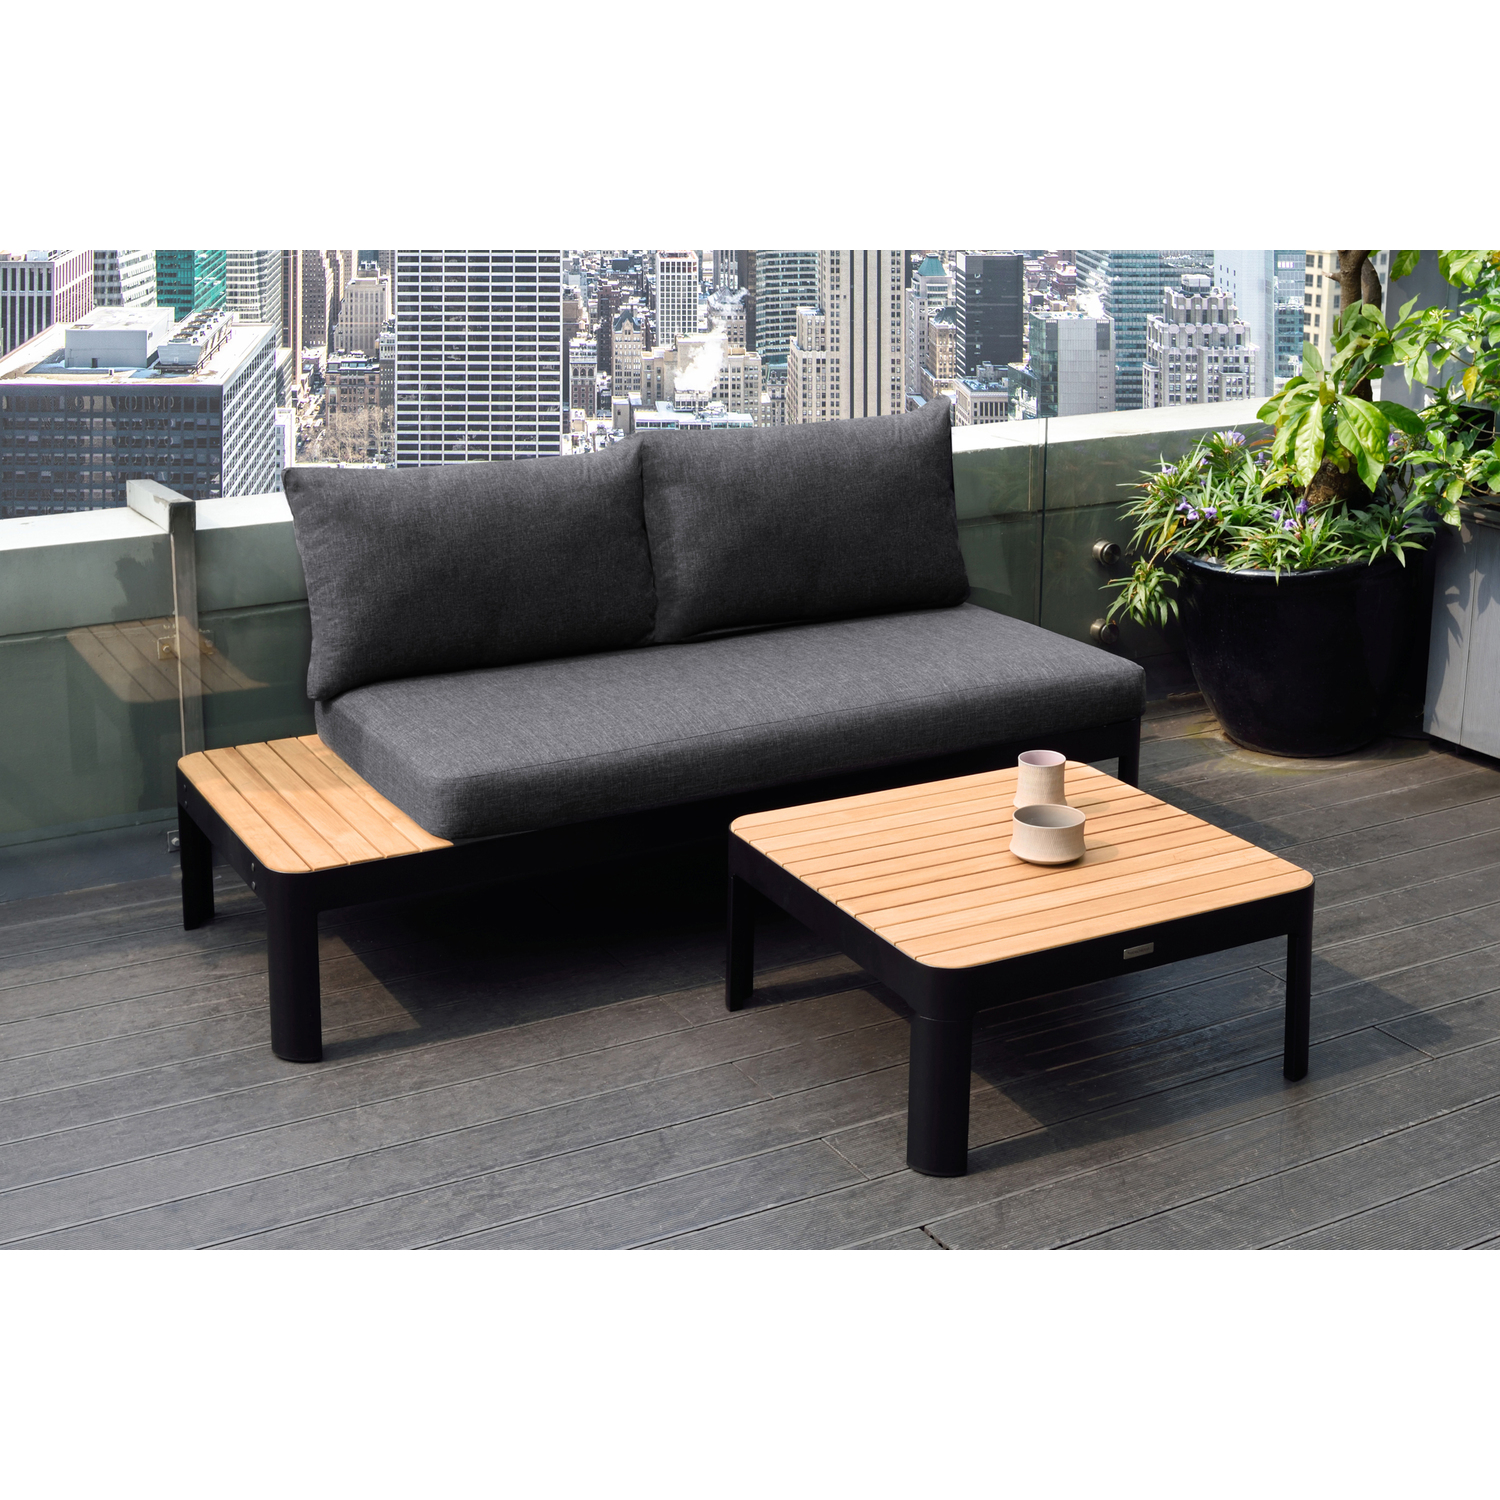 Portals Outdoor Square Coffee Table in Black Finish with Natural Teak Wood Top - image 3 of 6